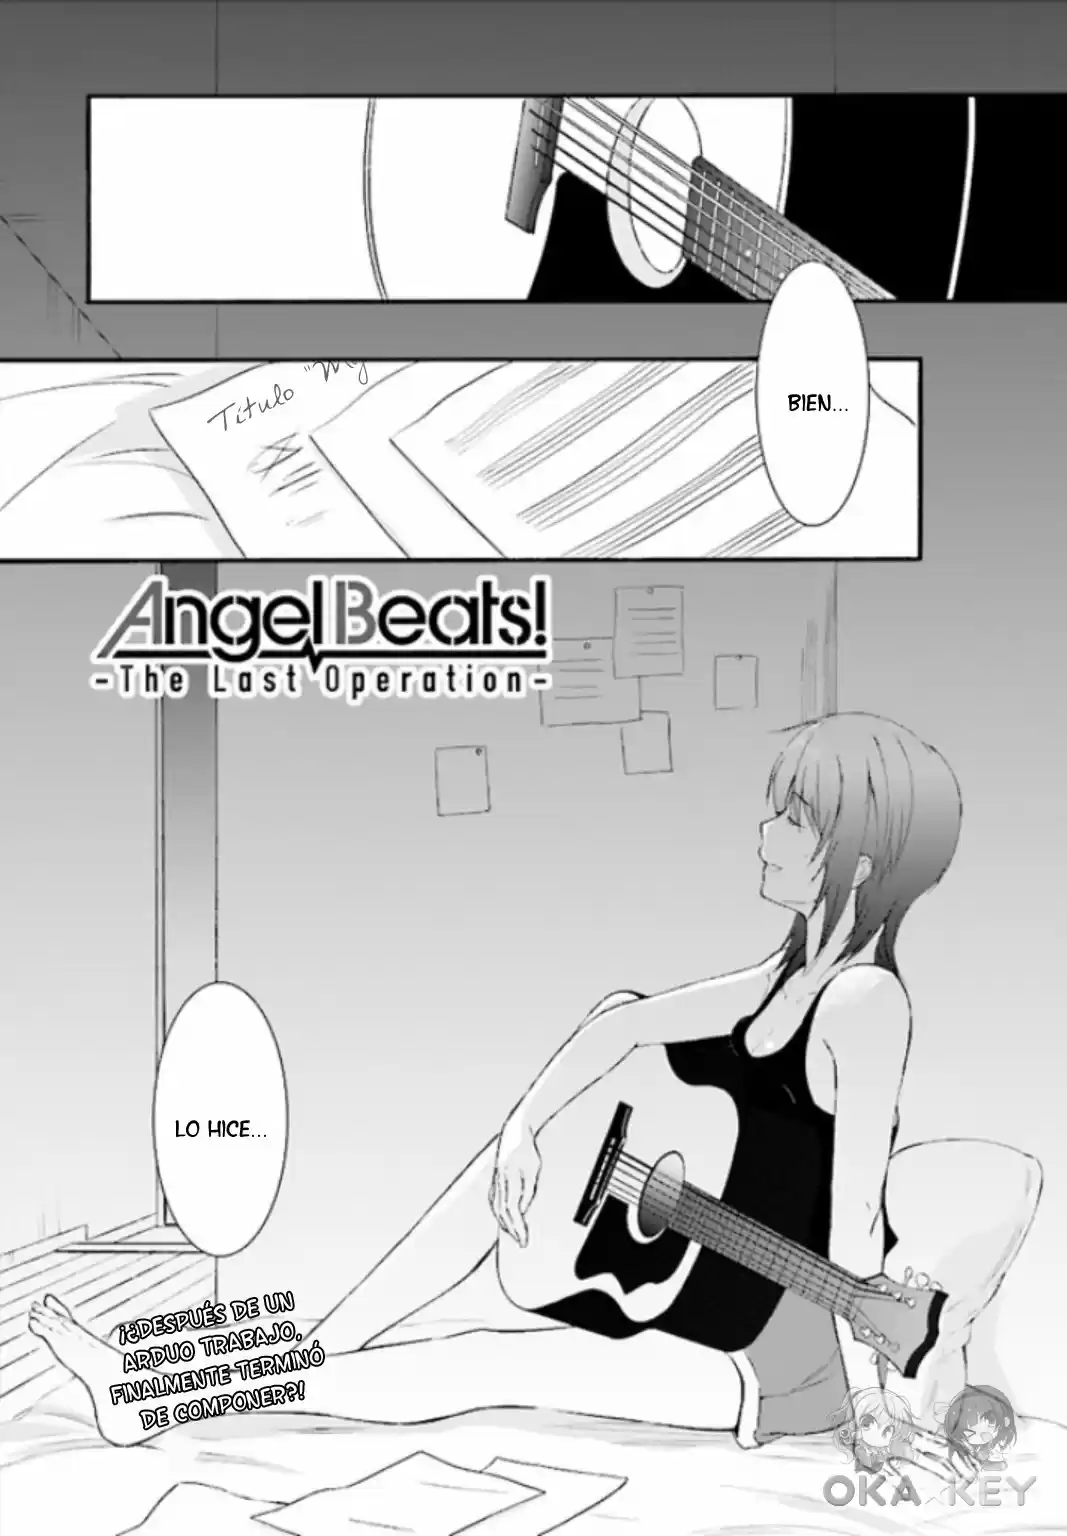 Angel Beats!: The Last Operation: Chapter 9 - Page 1